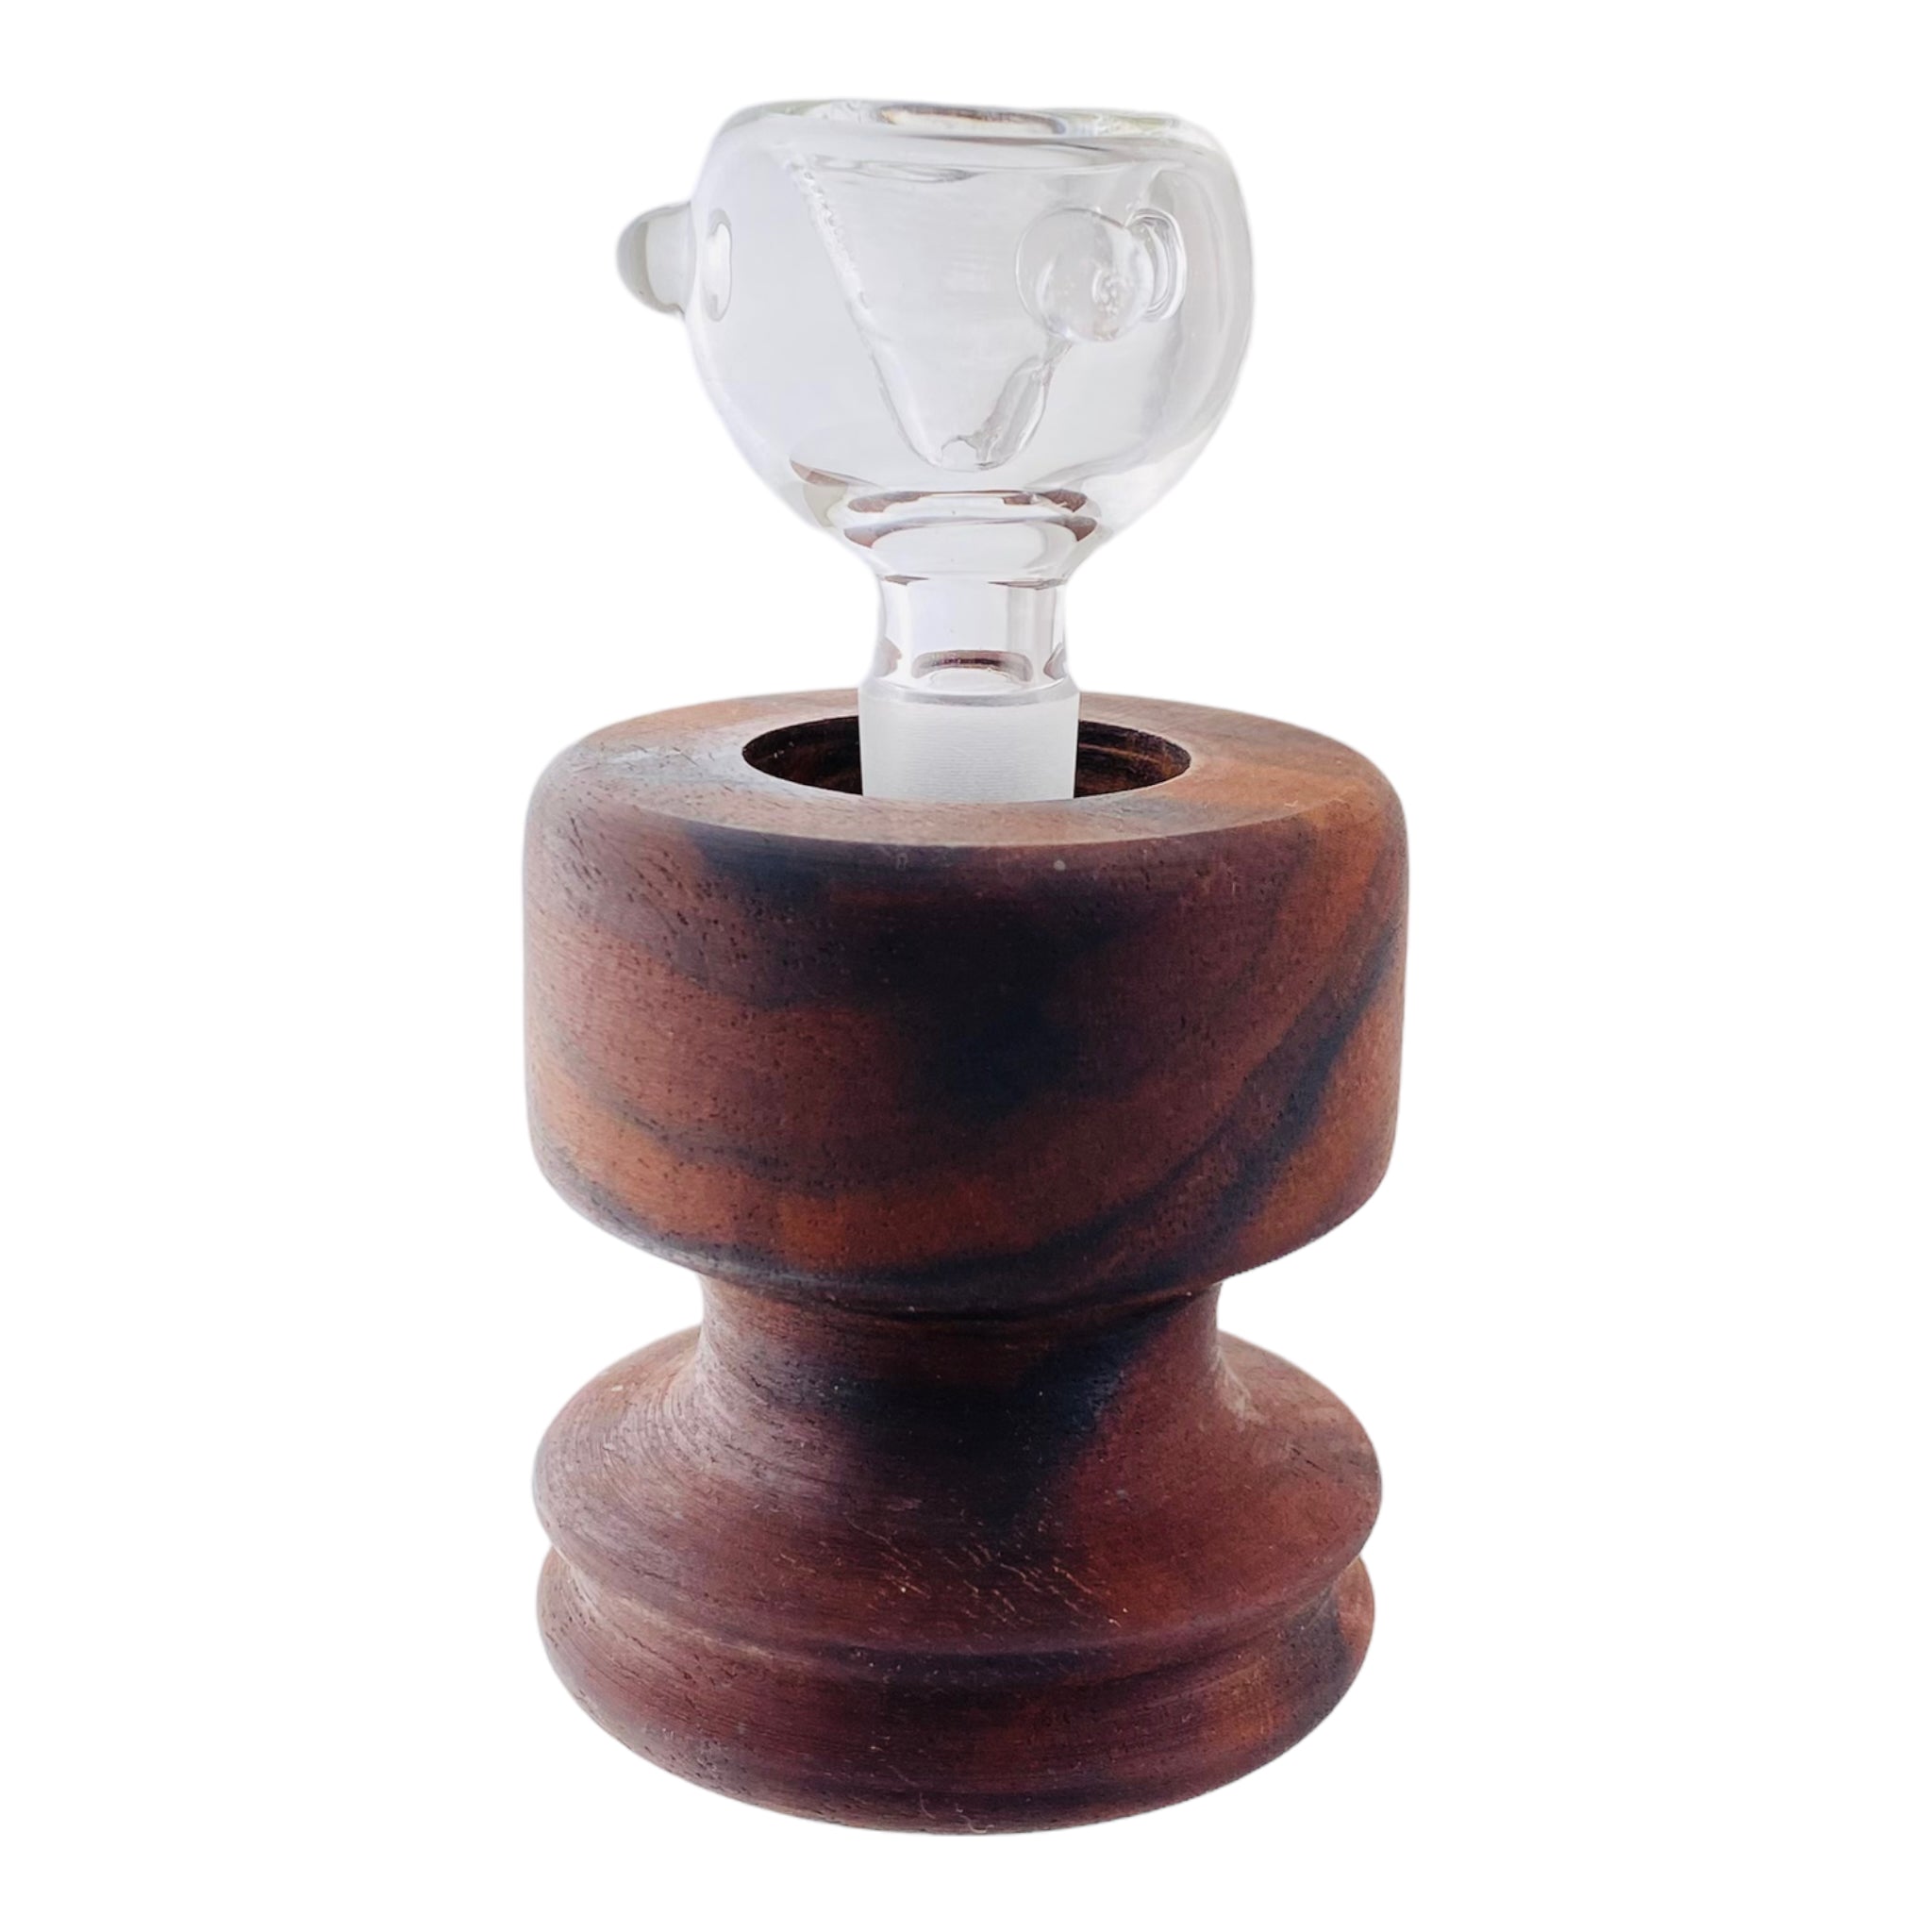 Round Single Hole Wood Display Stand Holder For 14mm Bong Bowl Pieces Or Quartz Bangers - Black Walnut Hat